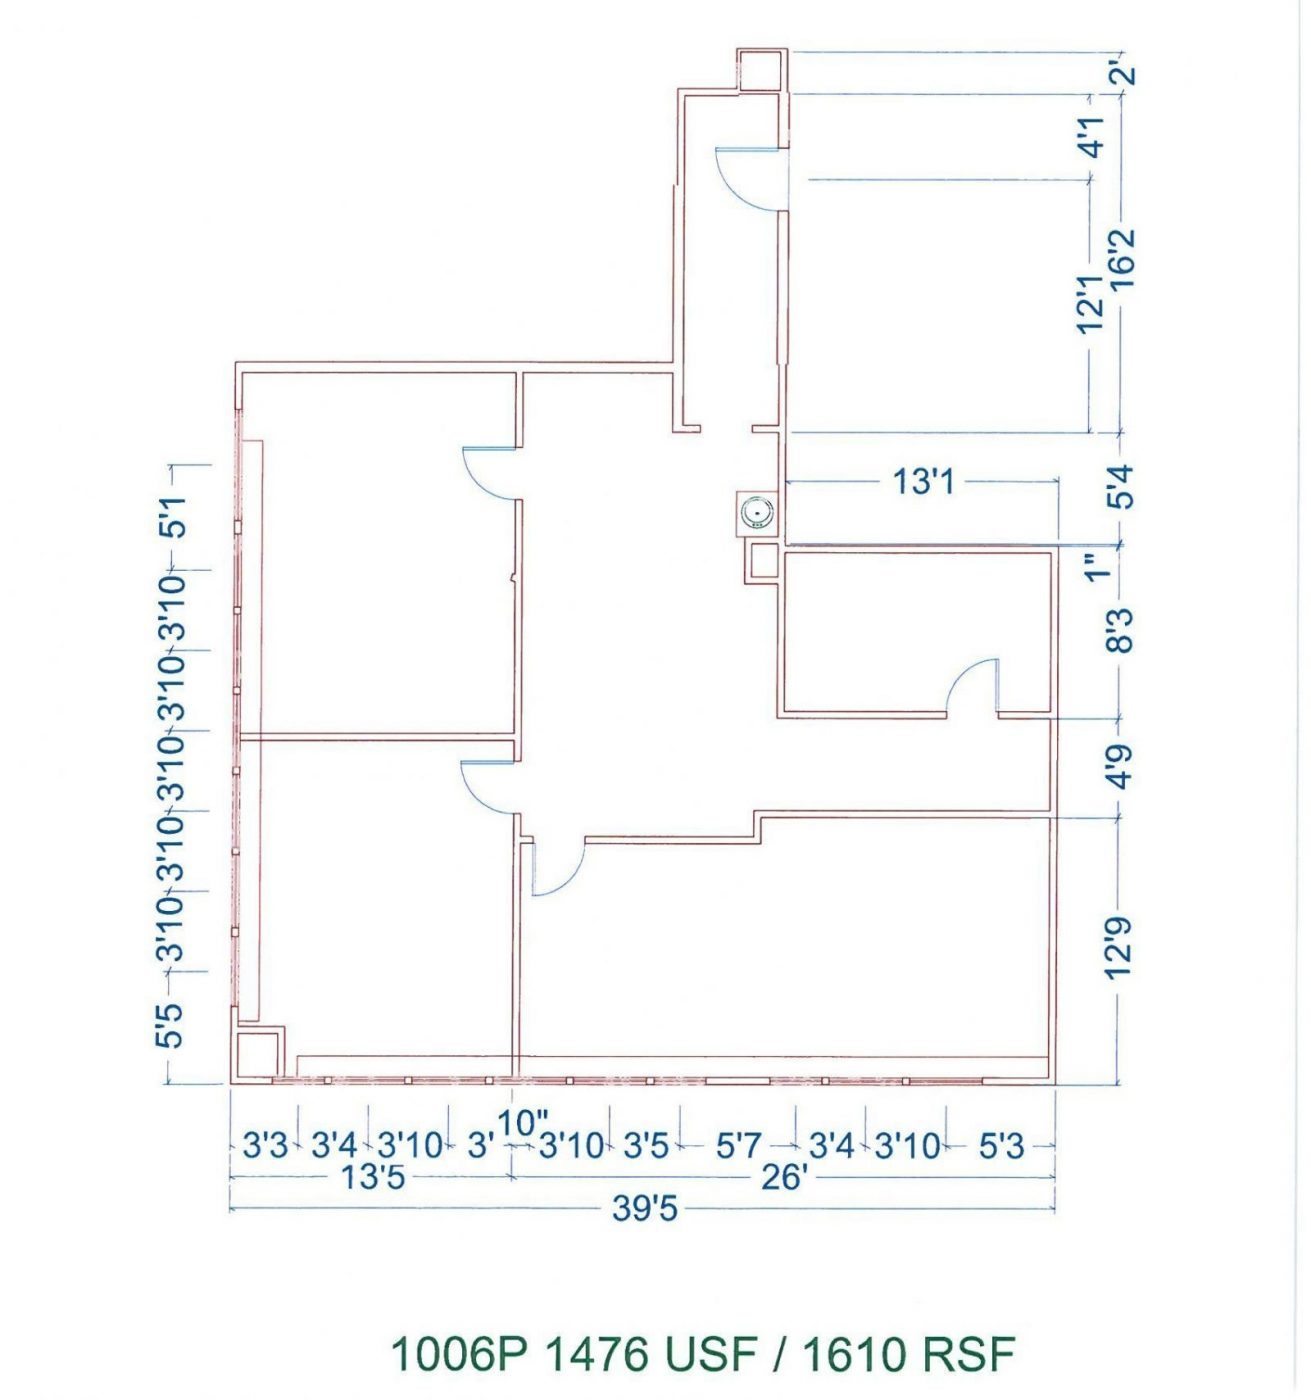 Floor Plan for unit 1006P at 20755 Greenfield Rd - 10th Floor Southfield, MI 48075